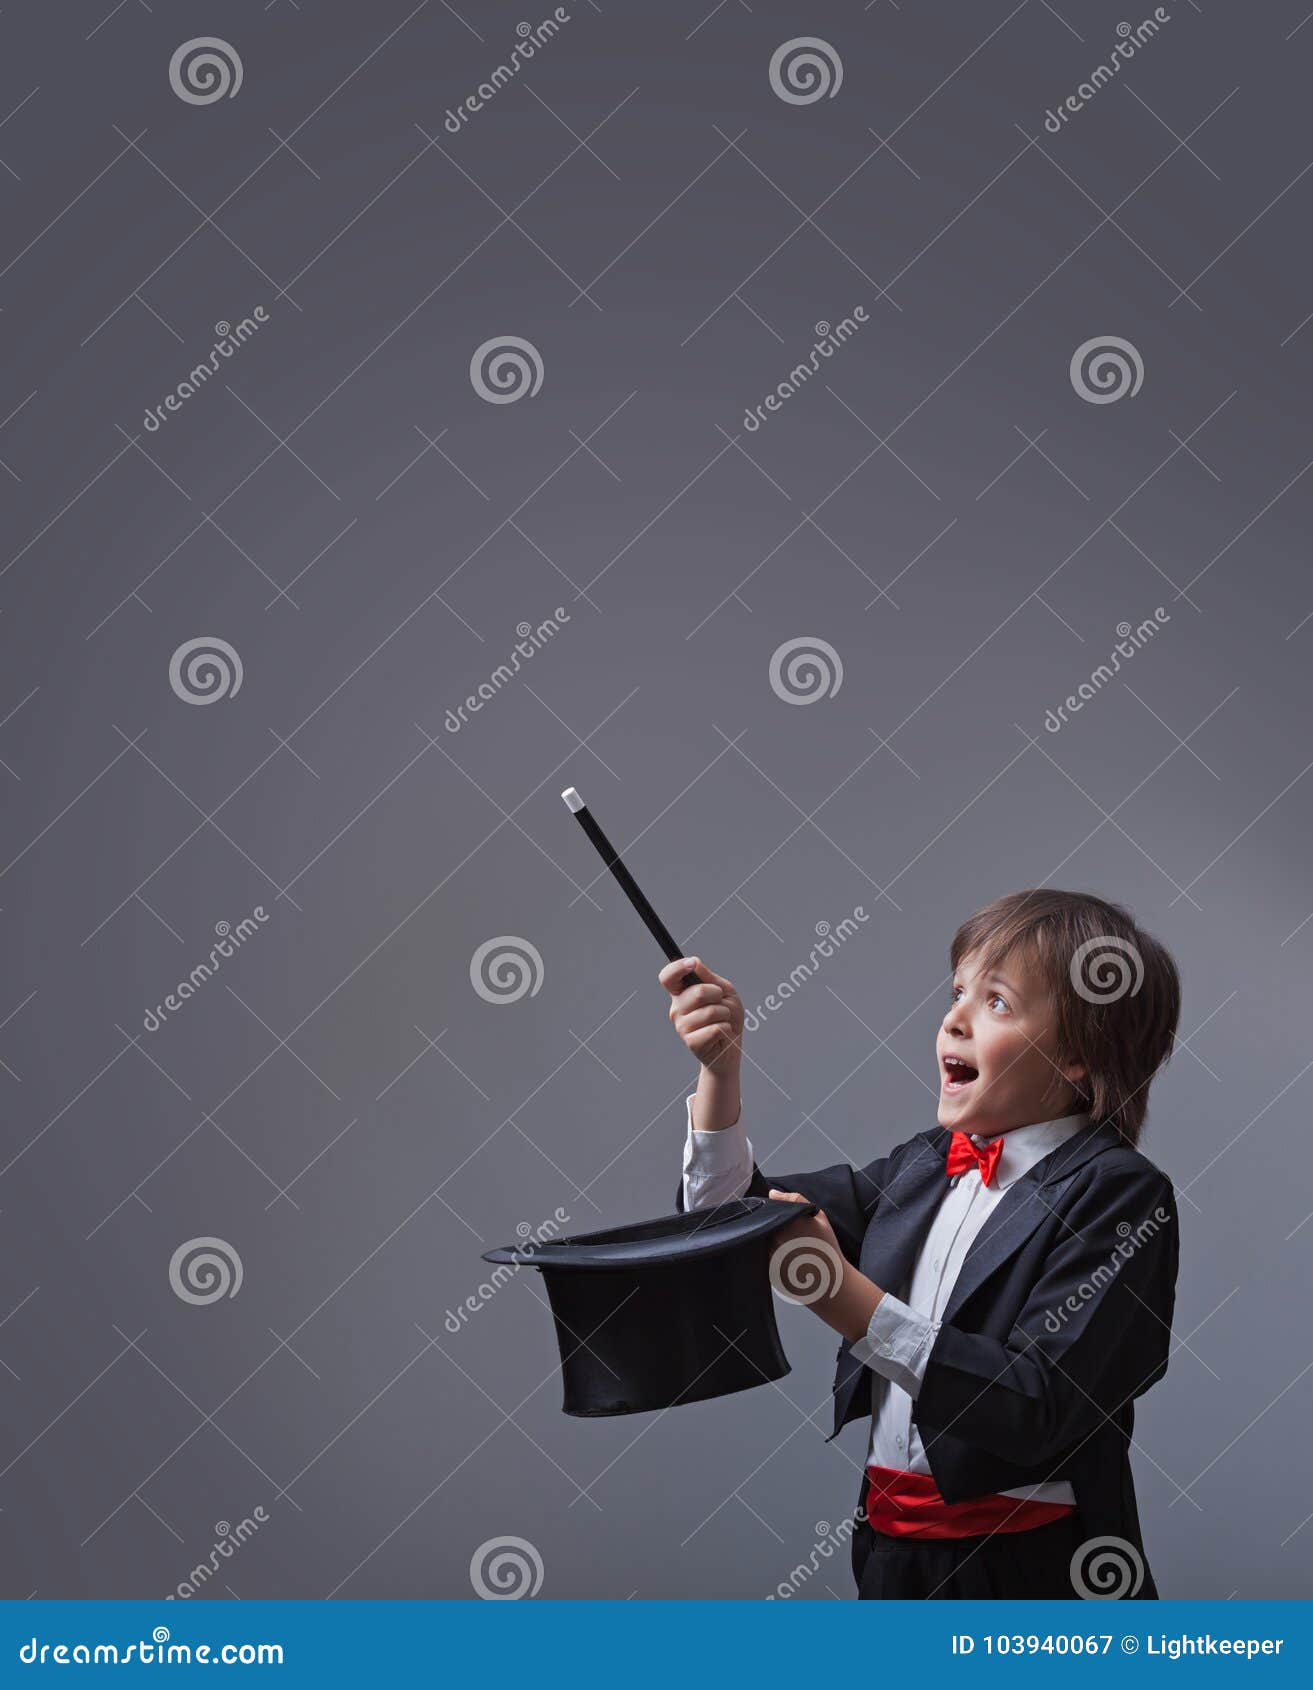 All 100+ Images the magician touched the child with the wand Superb